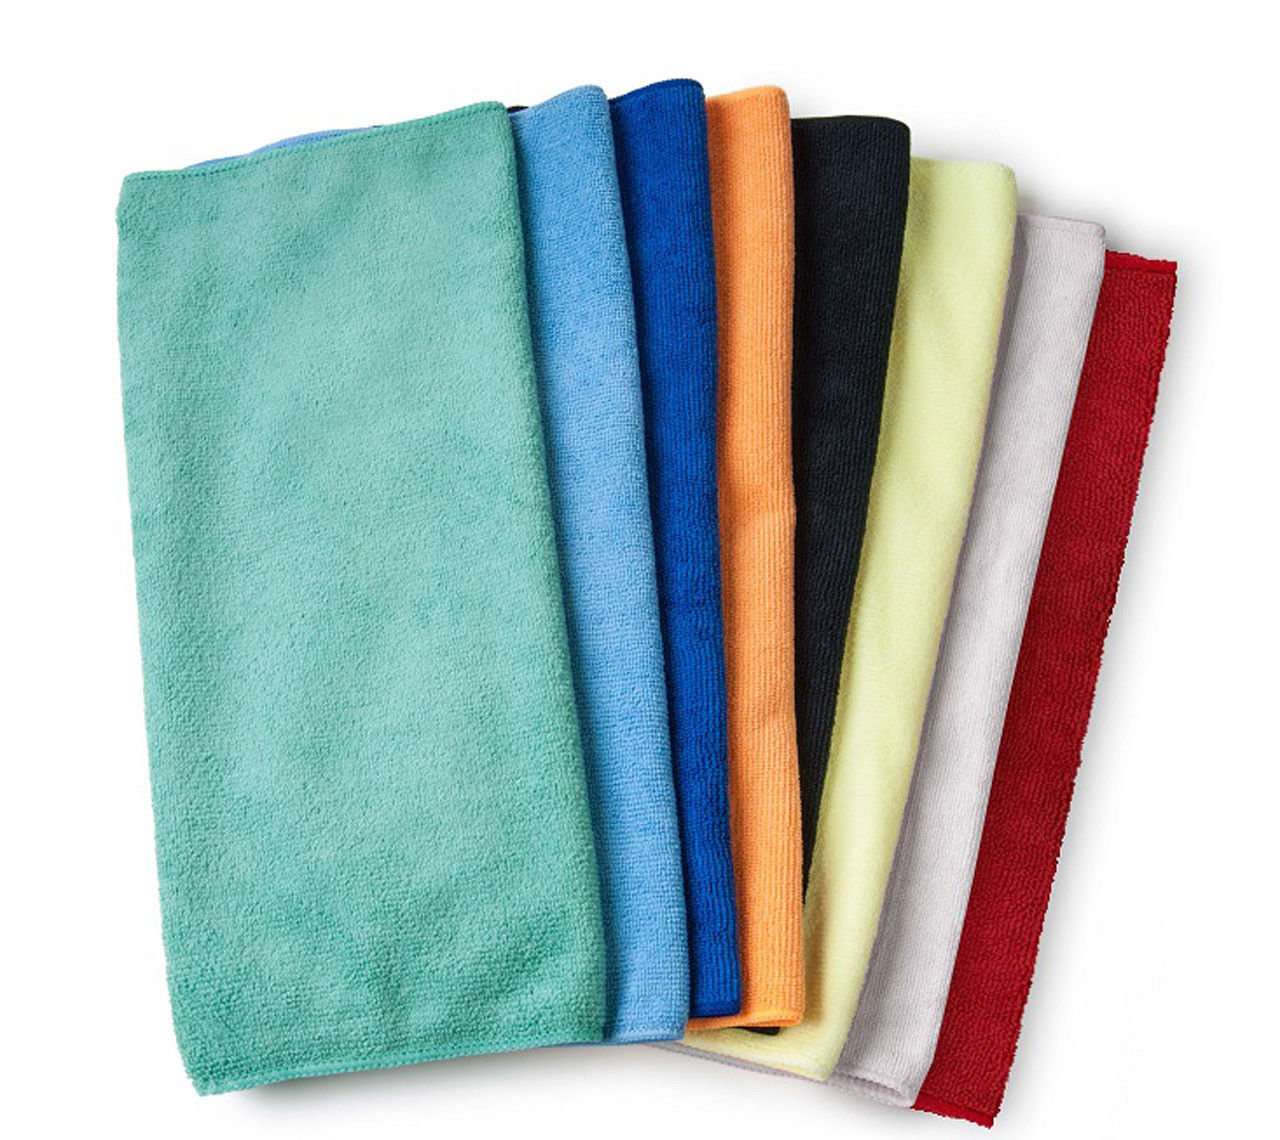 Before buying, what are golf towels bulk in microfiber used for?